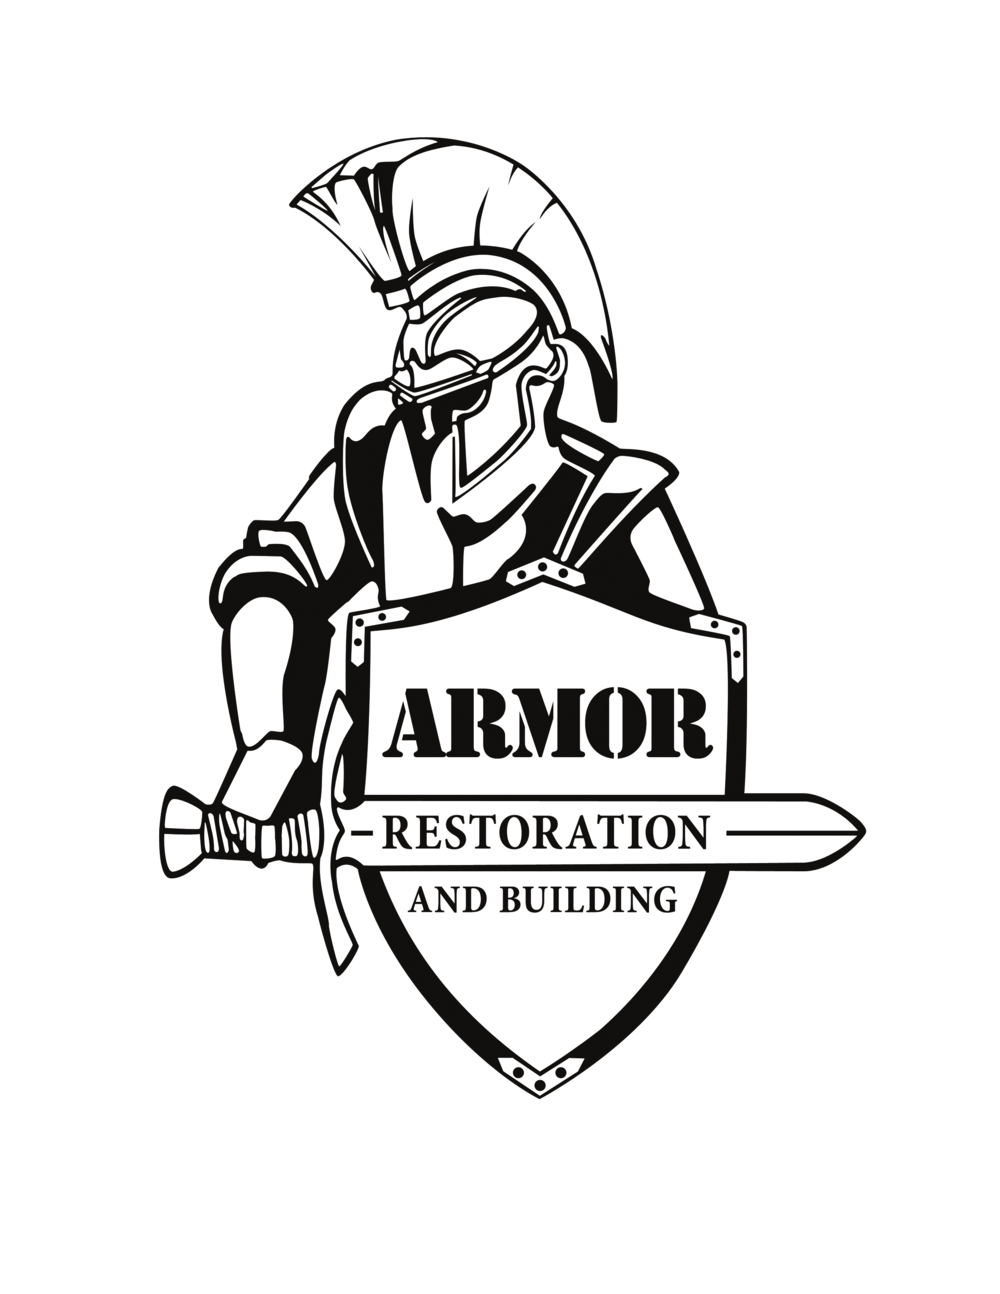 Armor Logo - About Us